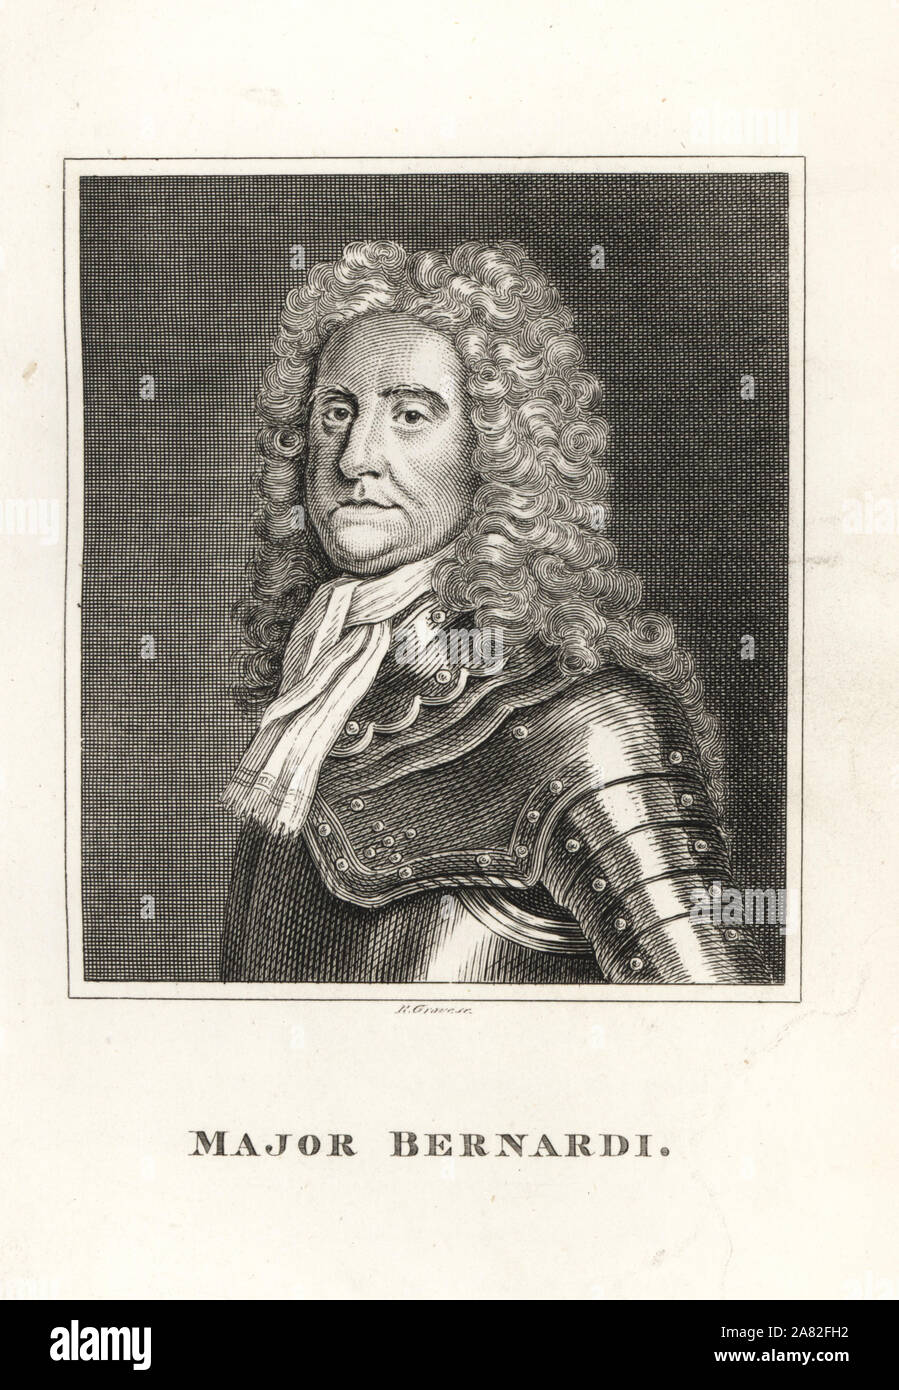 Major John Bernardi, a suspect in the assassination plot conspiracy against King William III. Engraving by R. Grave from James Caulfield's Portraits, Memoirs and Characters of Remarkable Persons, London, 1819. Stock Photo